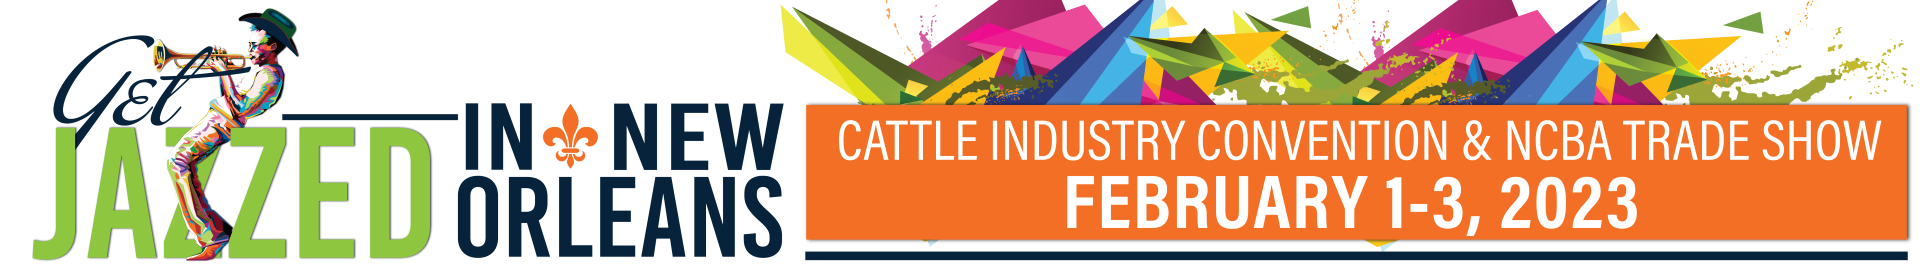 2023 Cattle Industry Convention and NCBA Trade Show Event Banner